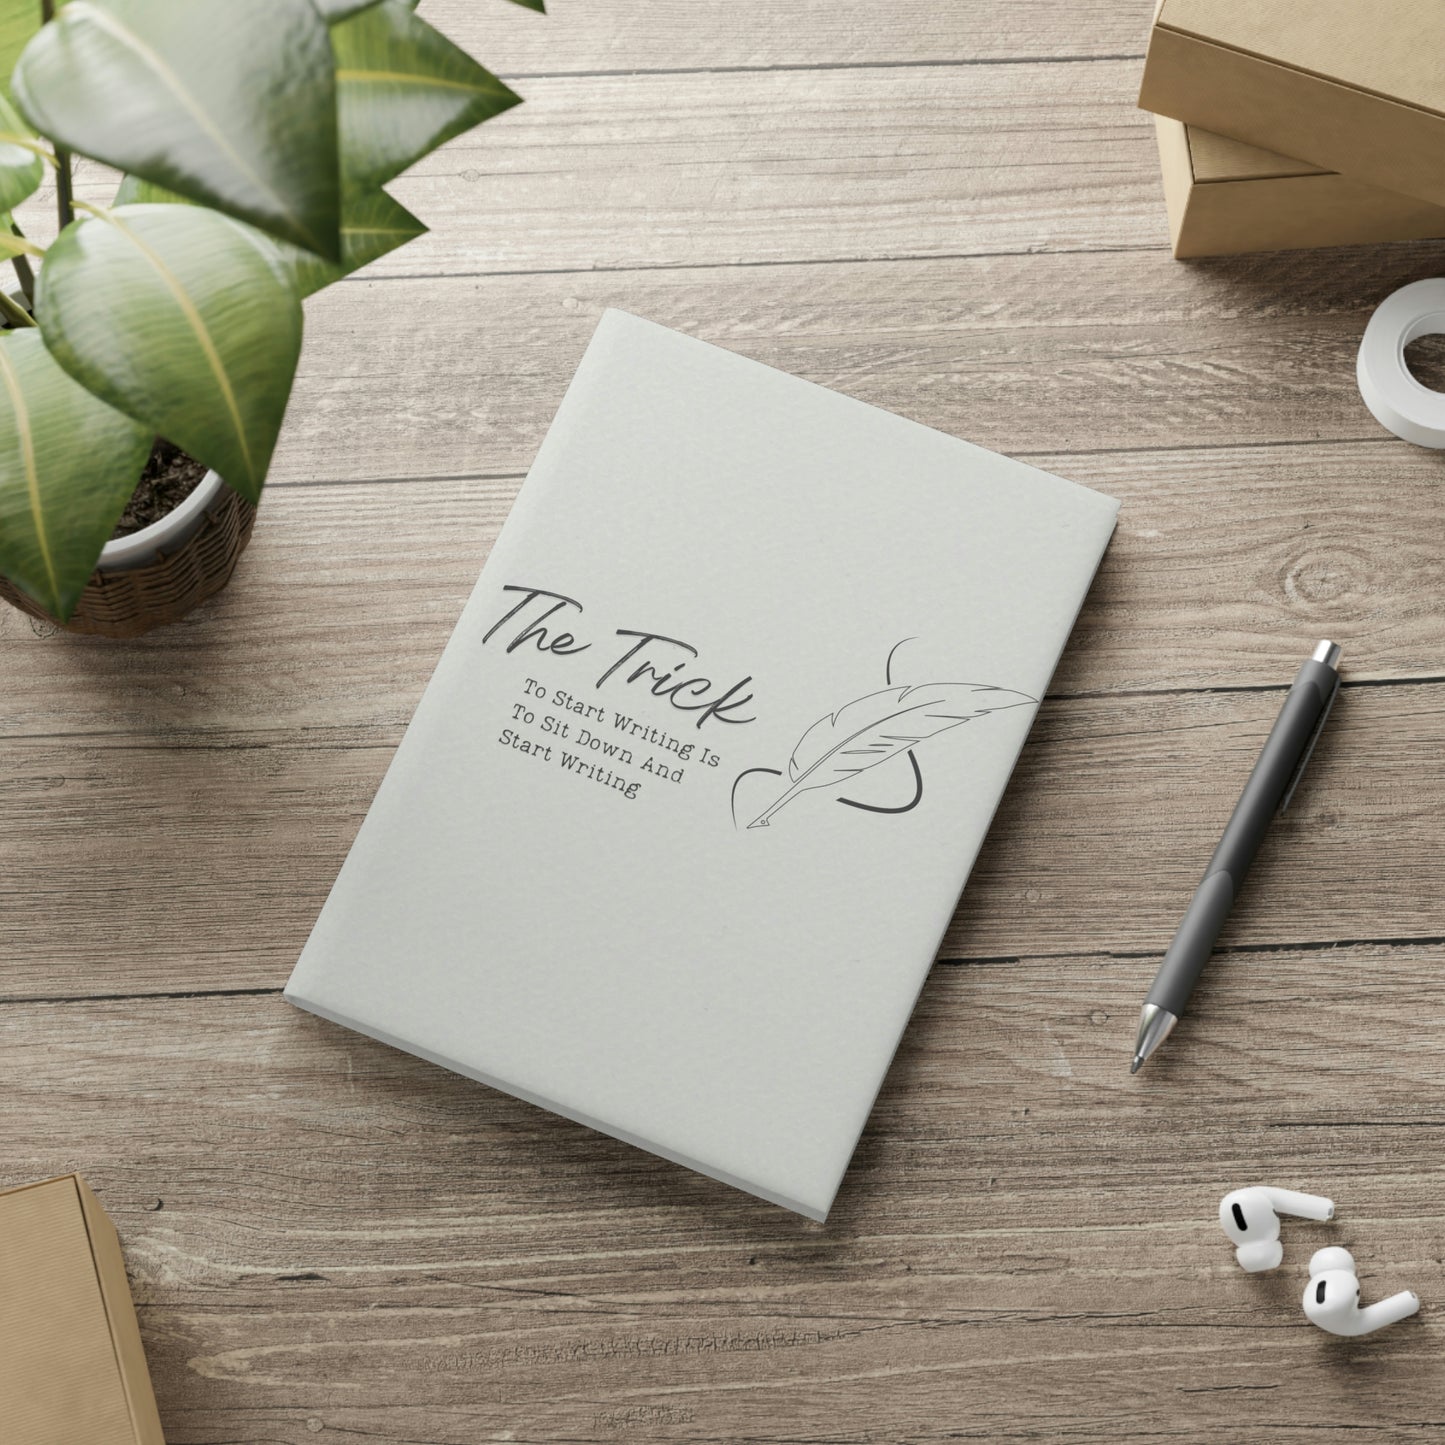 Hardcover Notebook with Puffy Covers // The trick to getting started is to get started // Write Out Loud